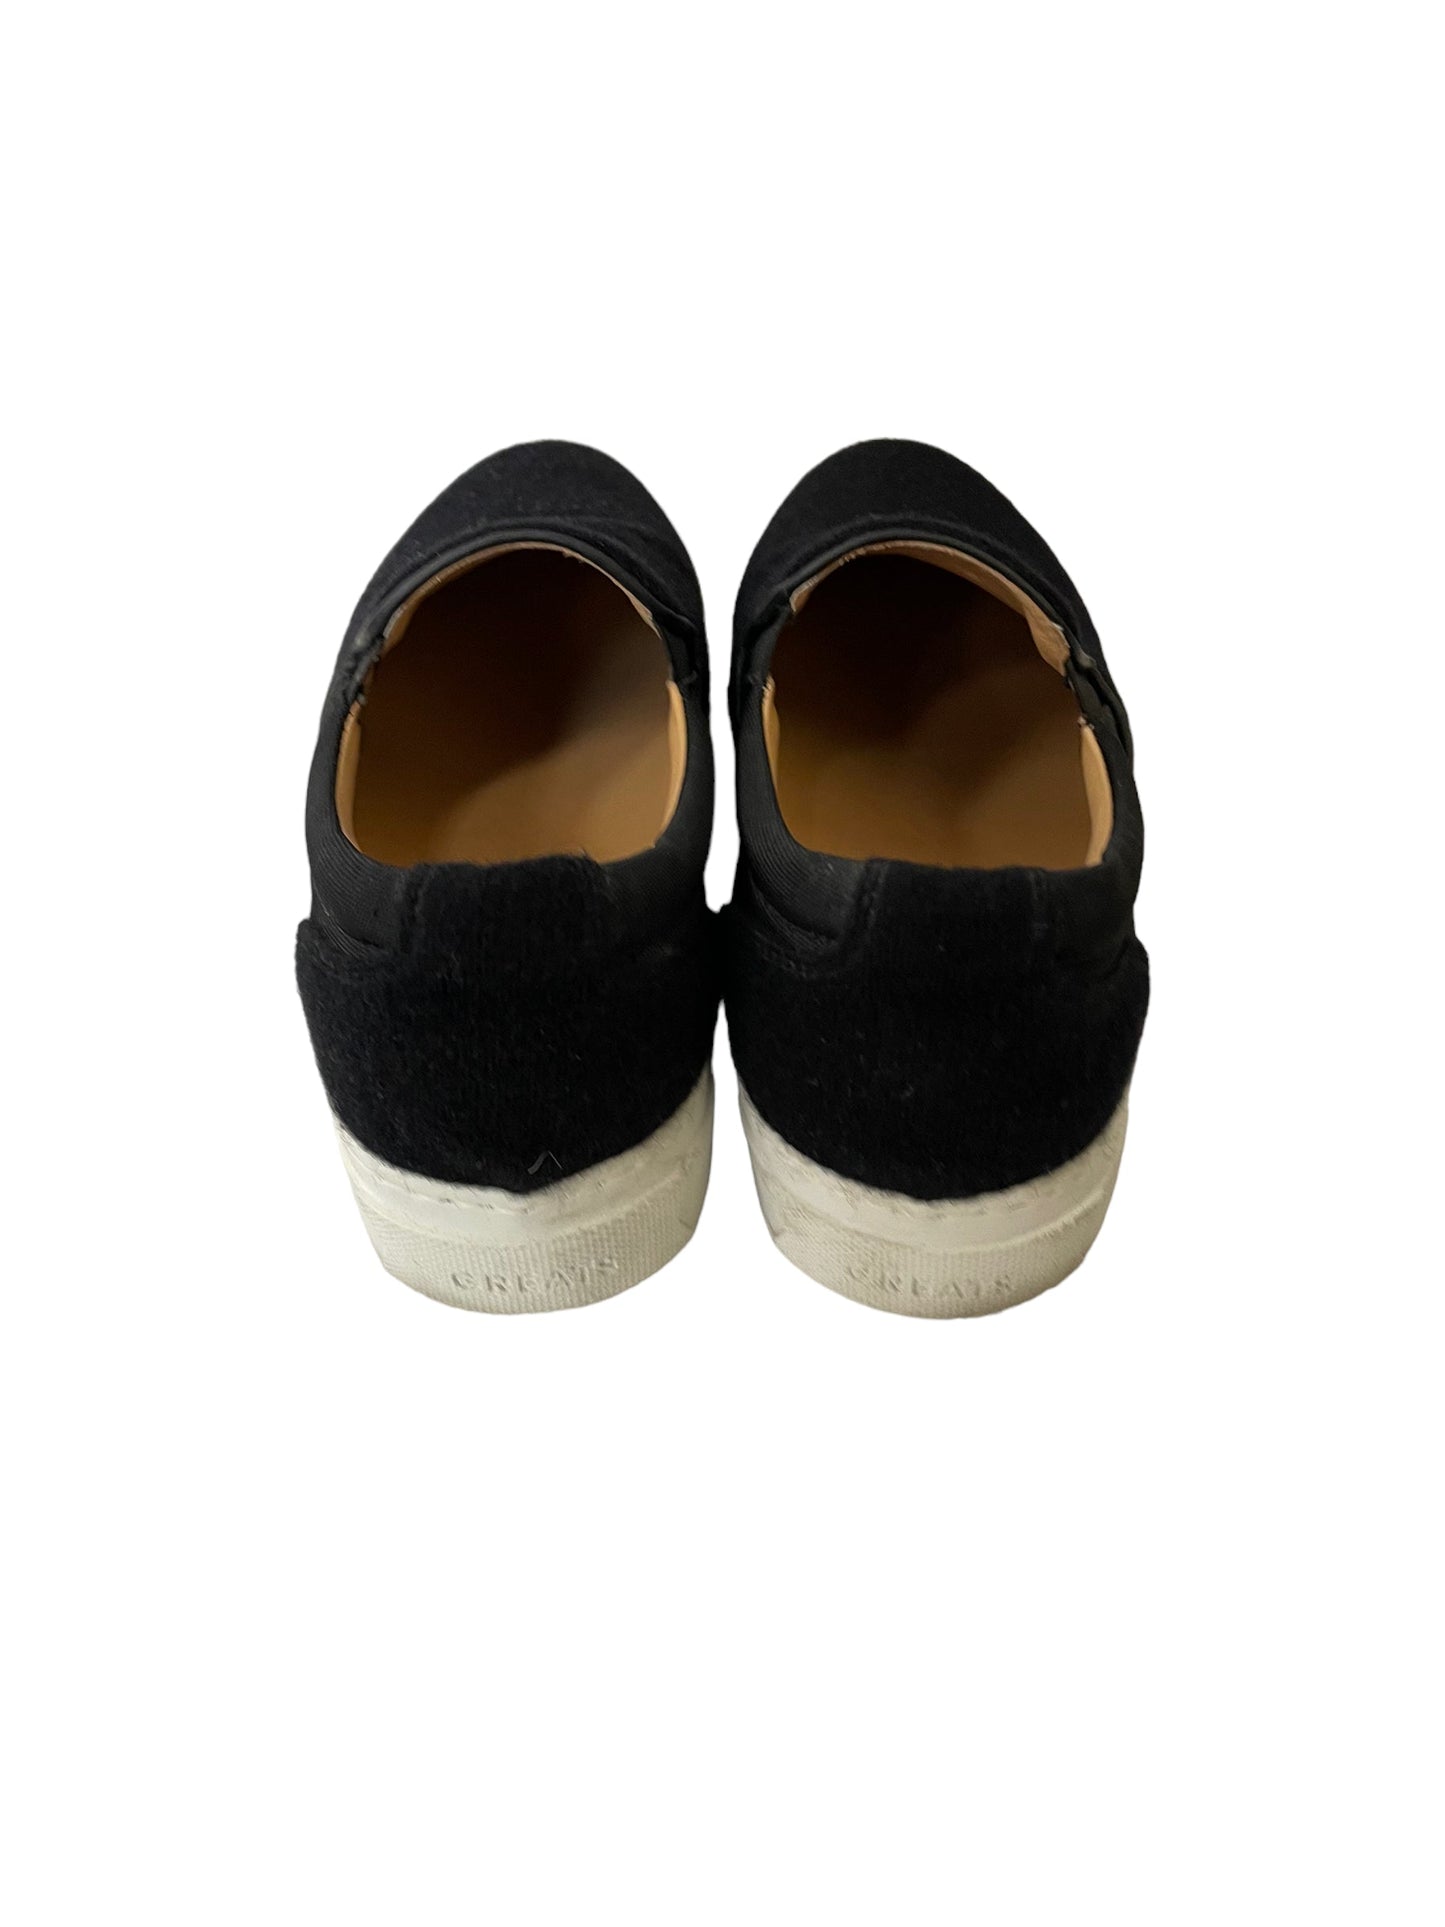 Shoes Flats Boat By Clothes Mentor  Size: 6